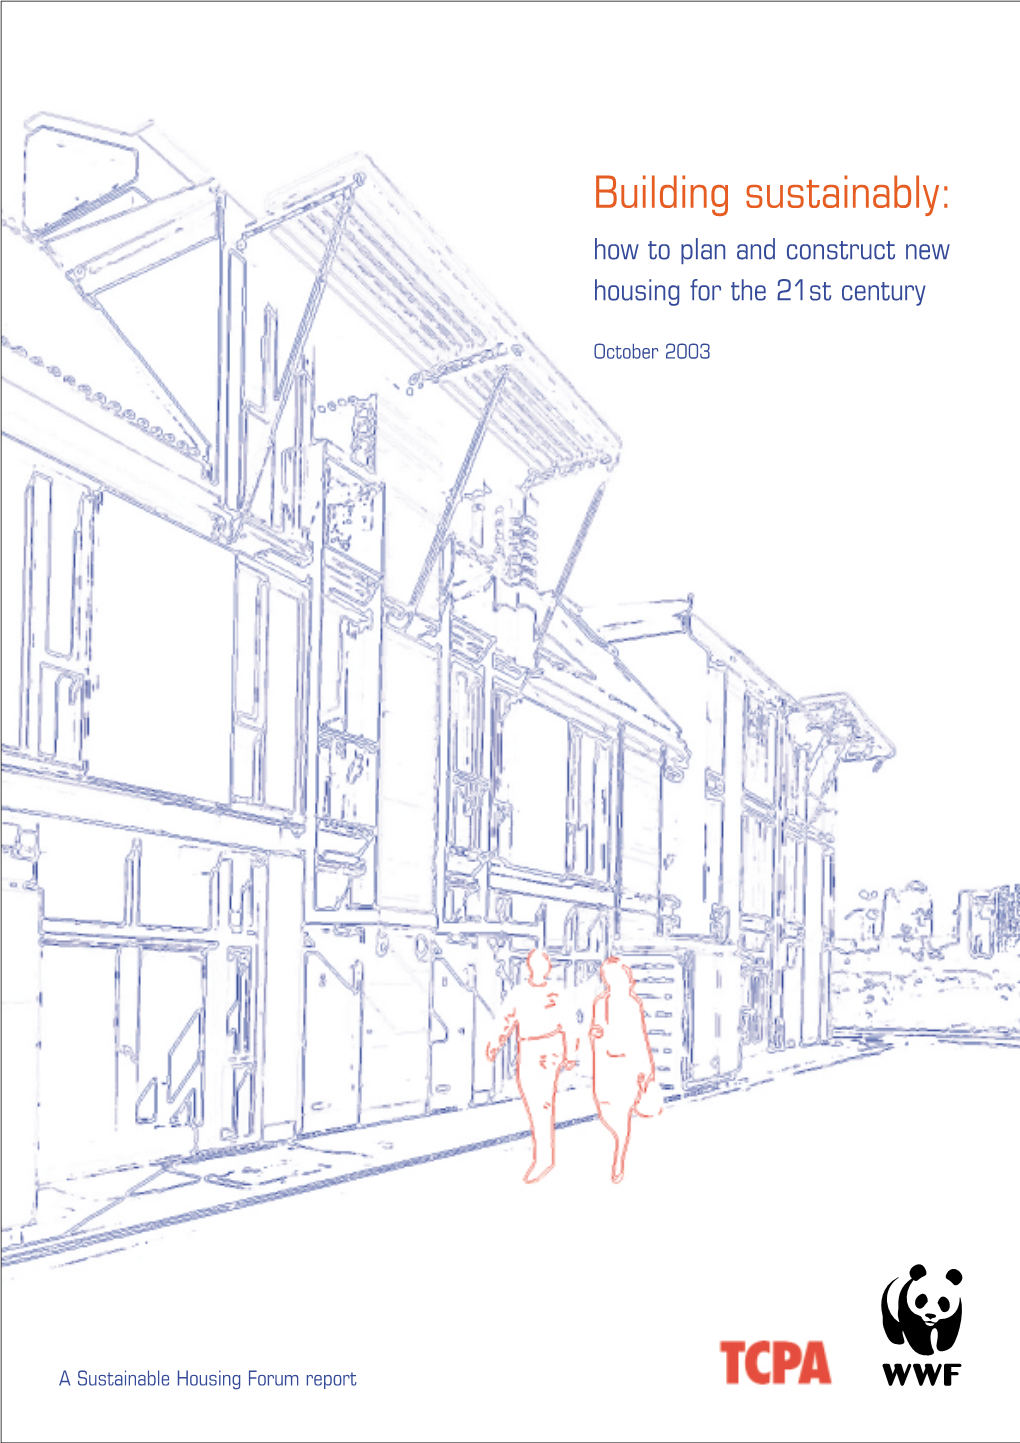 Building Sustainably: How to Plan and Construct New Housing for the 21St Century